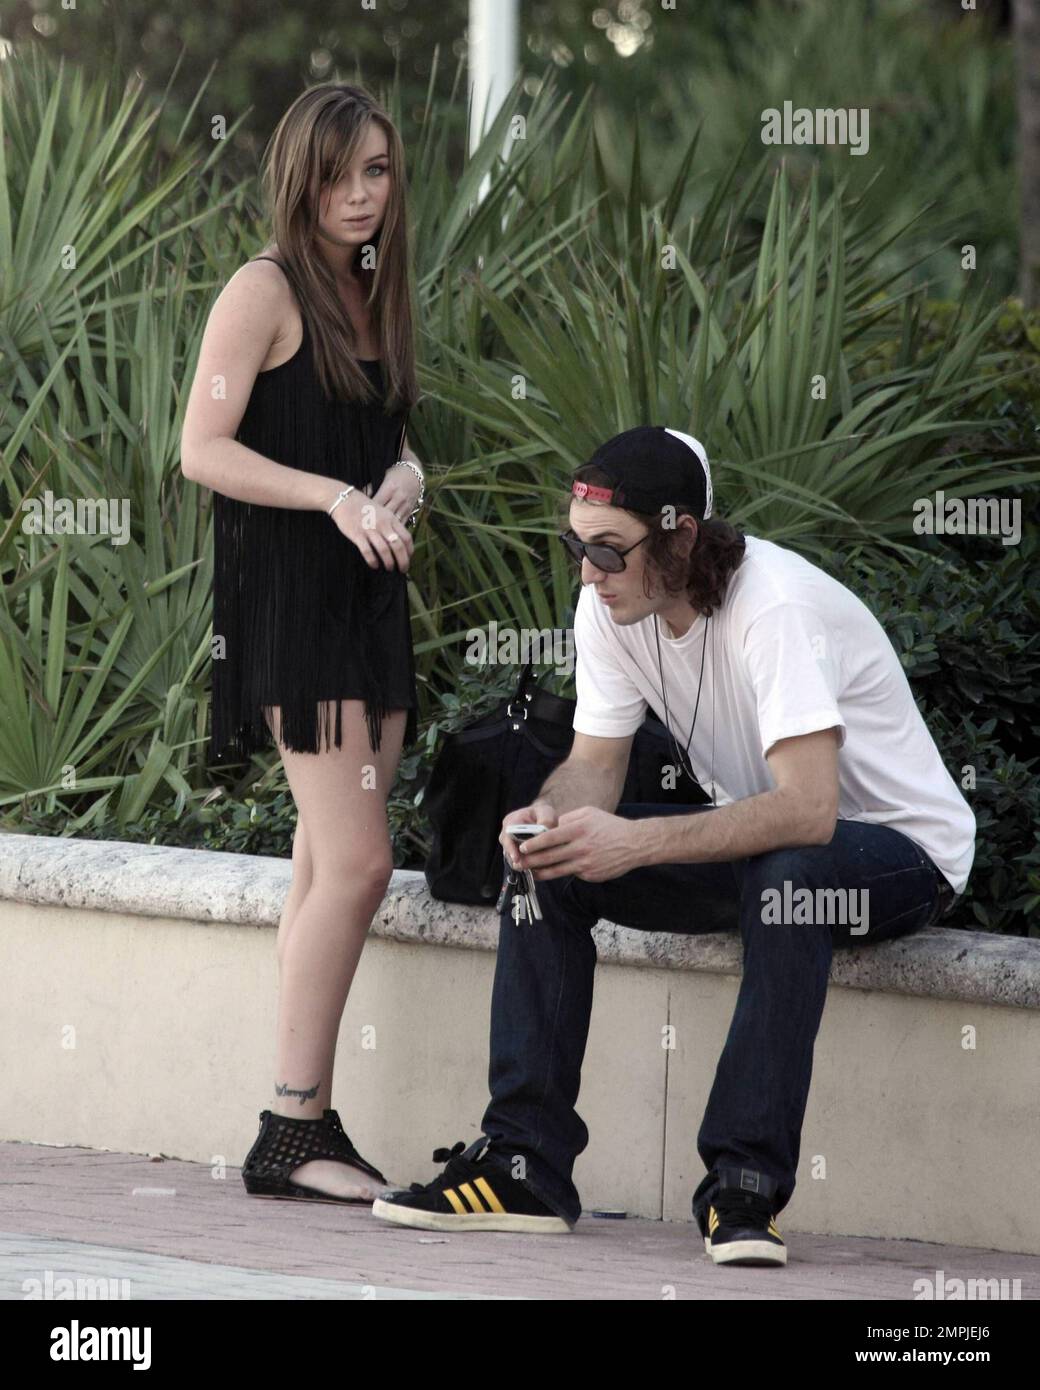 EXCLUSIVE!! In town during Art Basel Miami Beach, Capri Anderson, the 22-year-old who was with actor Charlie Sheen when he trashed his New York Plaza Hotel room, hangs out with a male friend near the boardwalk in South Beach.  Despite the New York incident having occurred several weeks ago it seems it has not been laid to rest.  According to reports Sheen maintains that he lost his temper because Anderson stole his $160,000 watch, claims Anderson denies.  Lawyers are said to working on Sheen's behalf, presumably to clear his name, regarding the outburst episode and sources have reportedly said Stock Photo